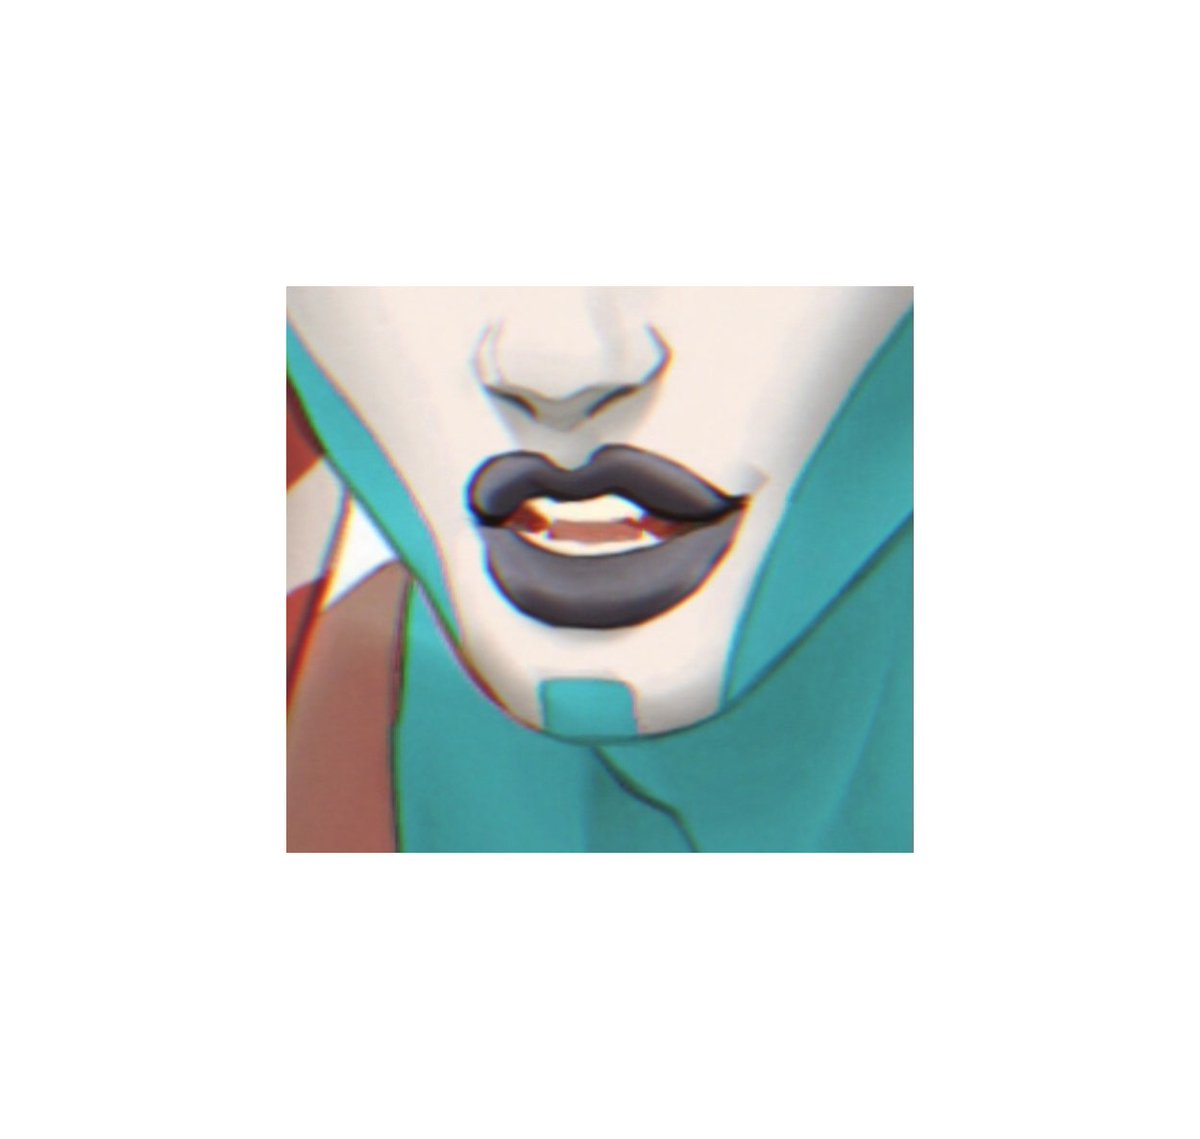 ⠀

Rumors say that Togruta bites are
𝐩𝐨𝐢𝐬𝐨𝐧𝐨𝐮𝐬; true or not, Lyn's fangs
are not to be underestimated, her
jaws are strong and her aim deadly.

⸻ #𝐒𝐄𝐃𝐔𝐂𝐓𝐈𝐕𝐄𝐒𝐔𝐍𝐃𝐀𝐘 ⸻

⠀